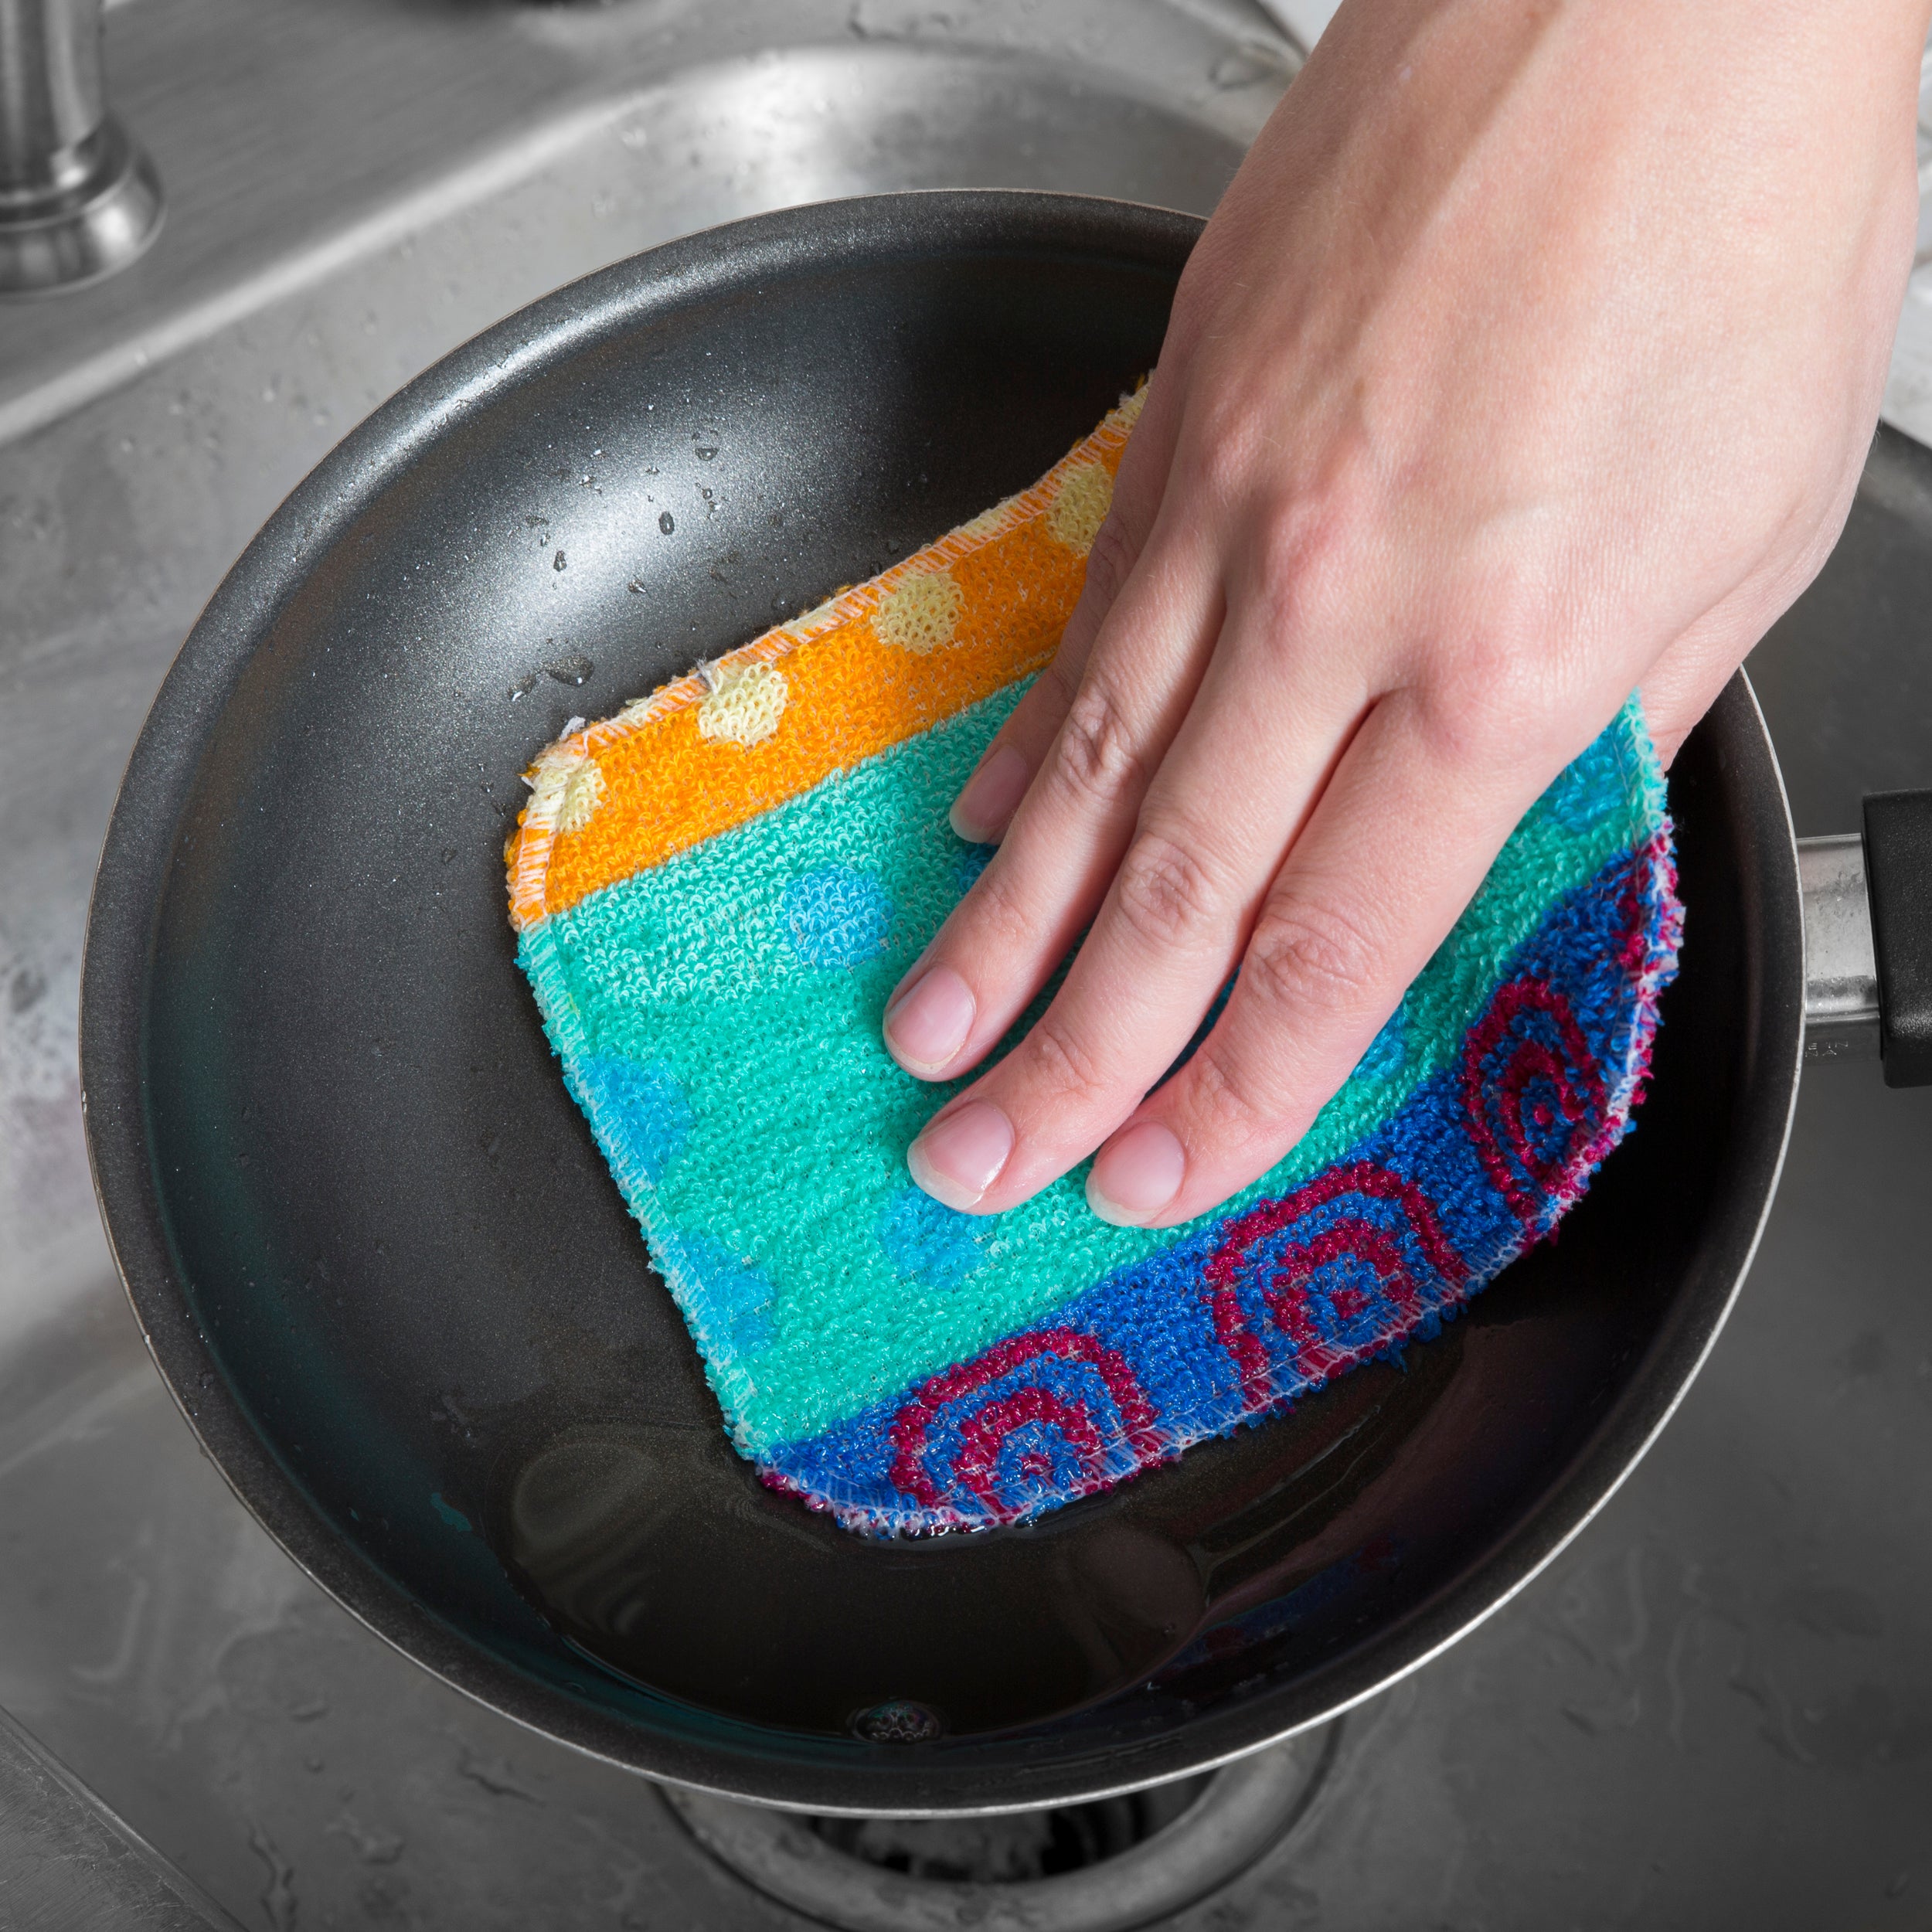 How to Clean a Dish Sponge the Absolute Right Way – Yaya Maria's